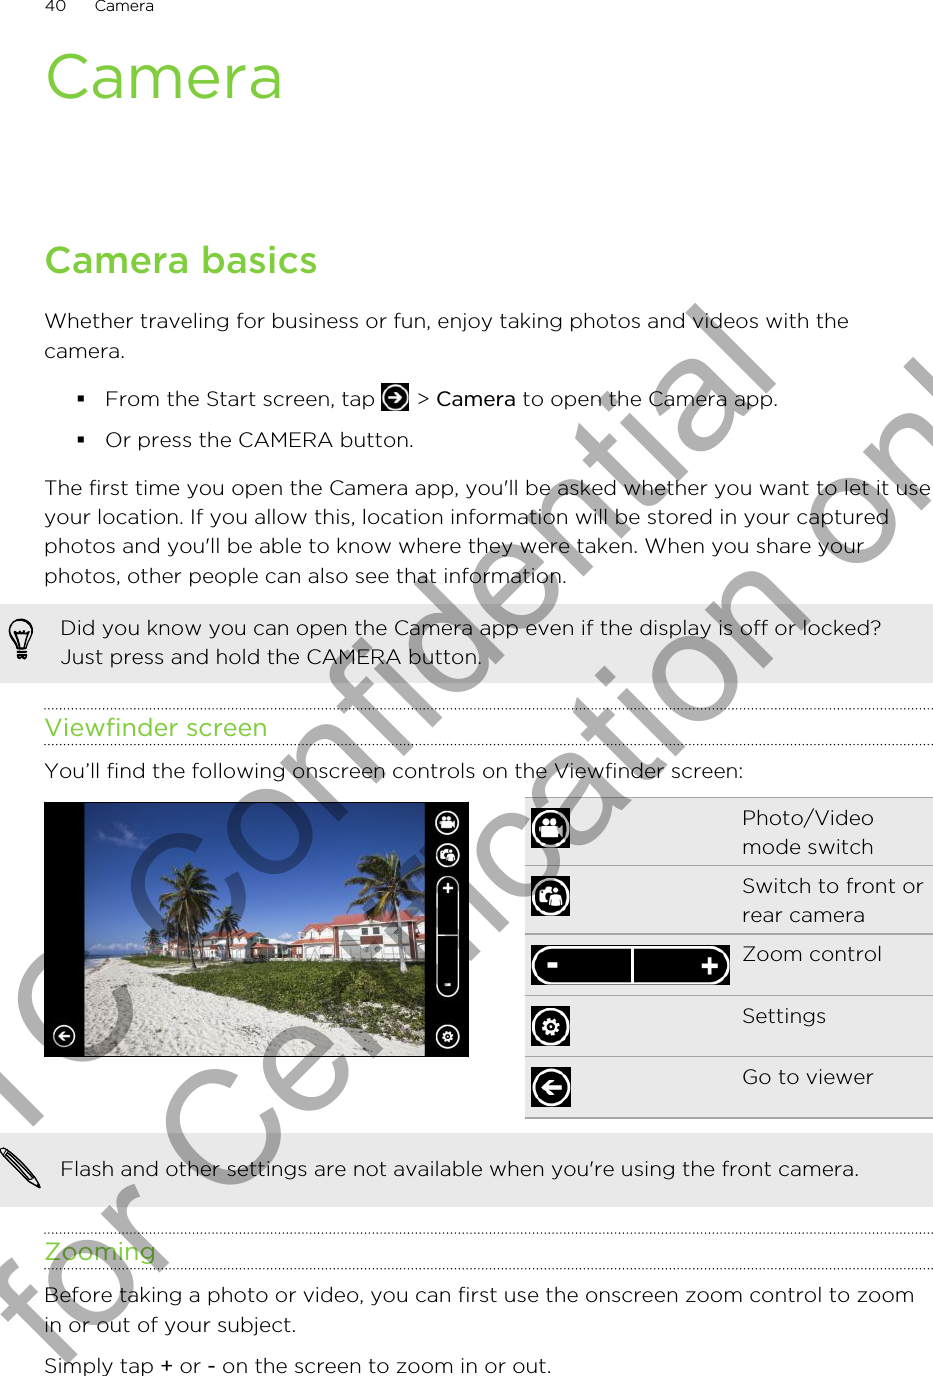 CameraCamera basicsWhether traveling for business or fun, enjoy taking photos and videos with thecamera.§From the Start screen, tap   &gt; Camera to open the Camera app.§Or press the CAMERA button.The first time you open the Camera app, you&apos;ll be asked whether you want to let it useyour location. If you allow this, location information will be stored in your capturedphotos and you&apos;ll be able to know where they were taken. When you share yourphotos, other people can also see that information.Did you know you can open the Camera app even if the display is off or locked?Just press and hold the CAMERA button.Viewfinder screenYou’ll find the following onscreen controls on the Viewfinder screen:Photo/Videomode switchSwitch to front orrear cameraZoom controlSettingsGo to viewerFlash and other settings are not available when you&apos;re using the front camera.ZoomingBefore taking a photo or video, you can first use the onscreen zoom control to zoomin or out of your subject.Simply tap + or - on the screen to zoom in or out.40 CameraHTC Confidential for Certification only